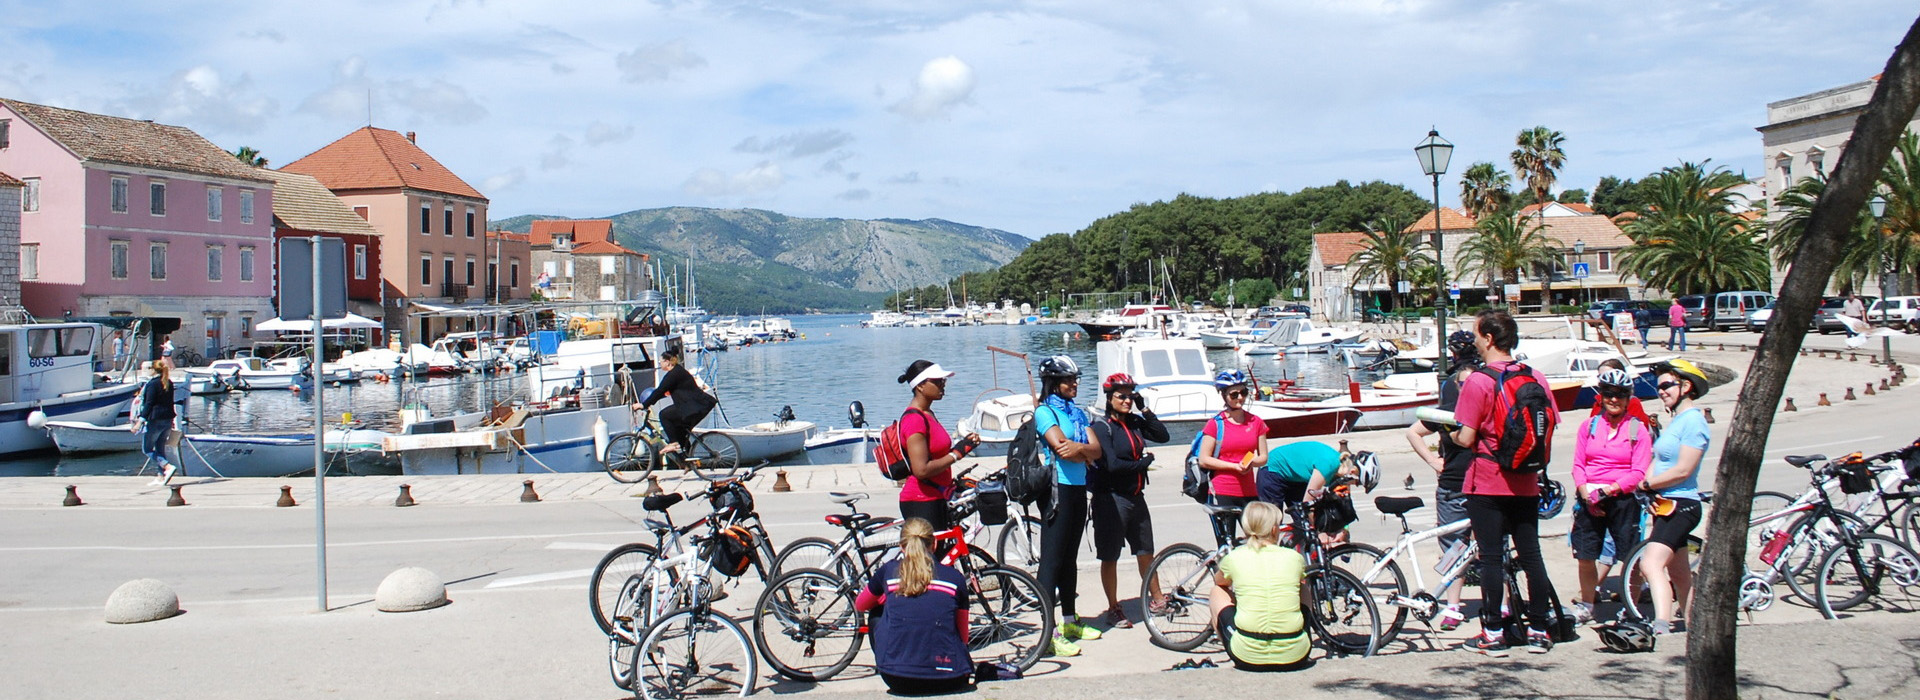 Cycling on the Dalmatian Coast guided holiday - Hvar